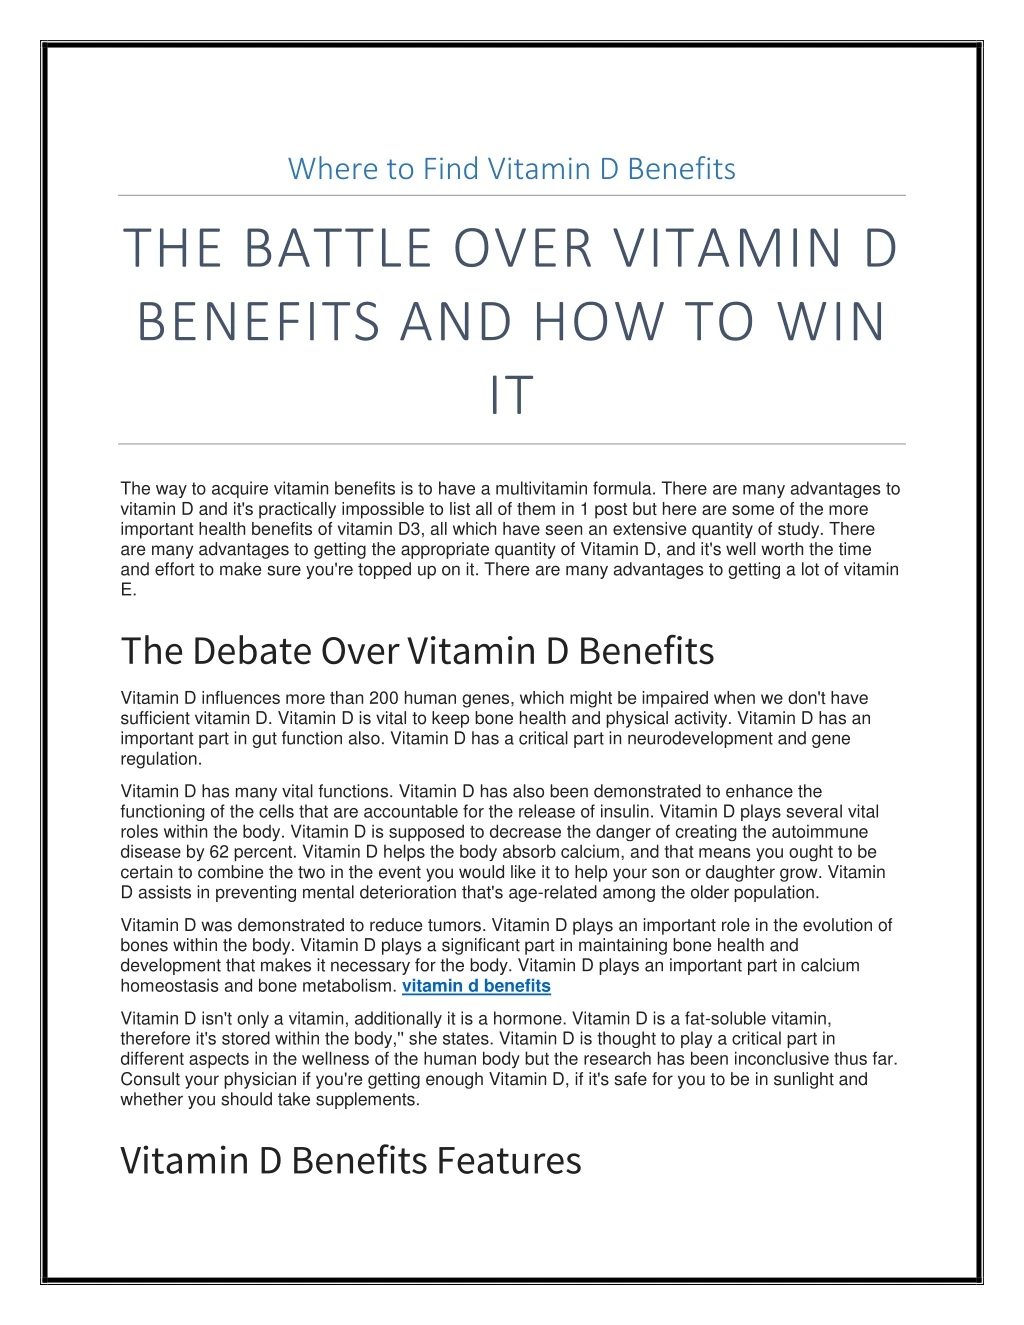 where to find vitamin d benefits